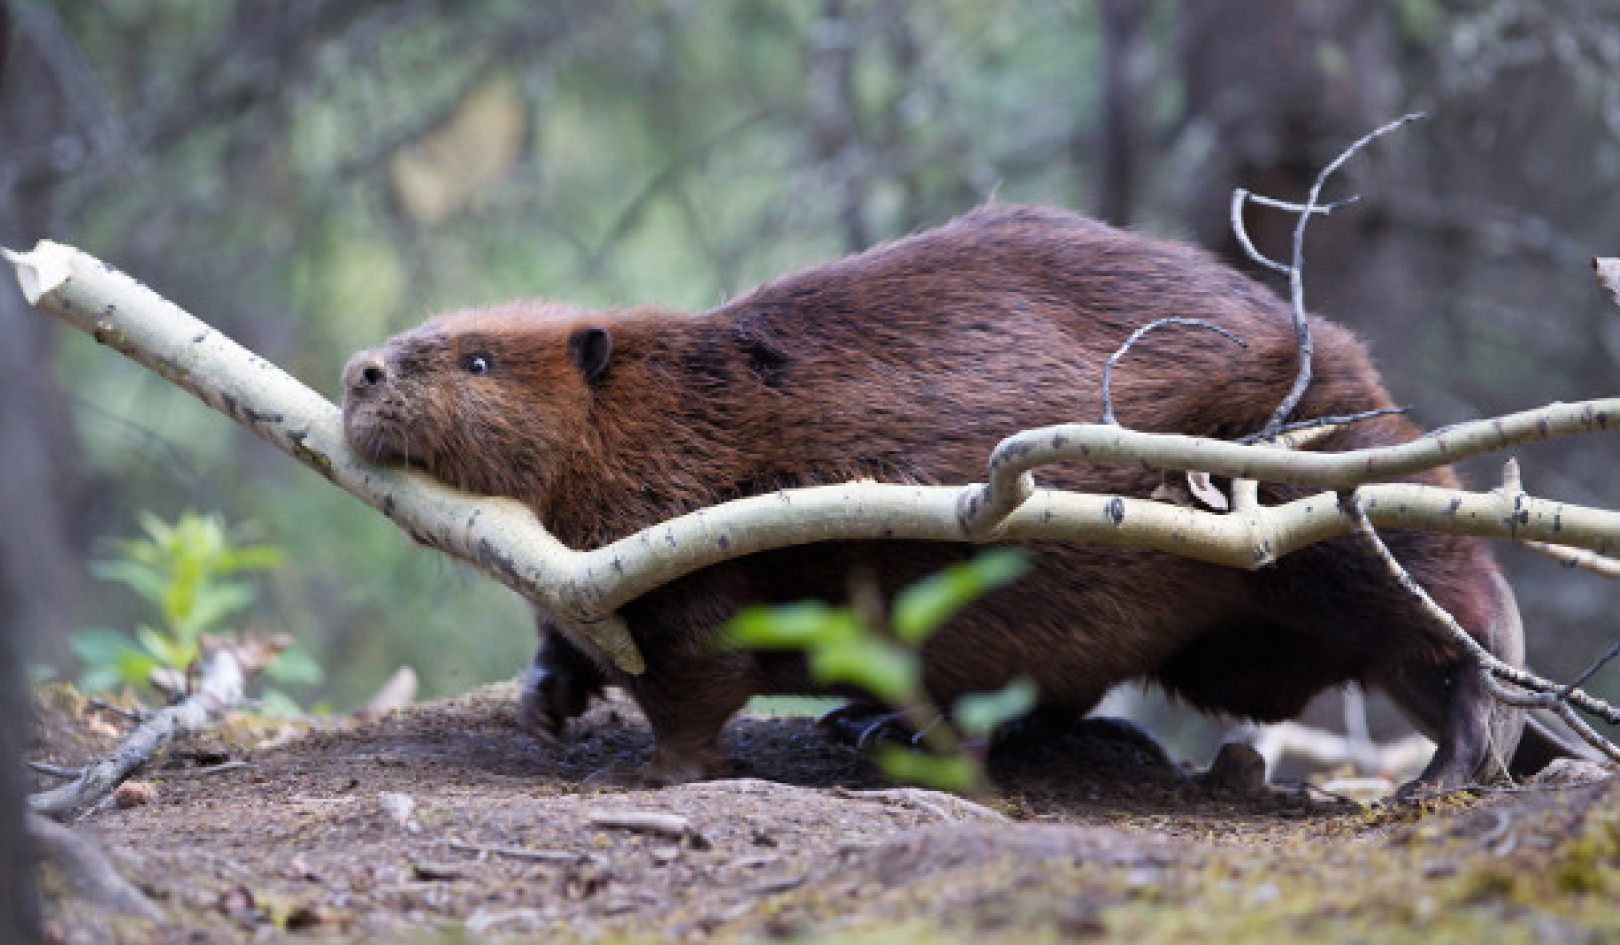 Leave It To Beavers: The Ecological Importance of Nature's Engineers